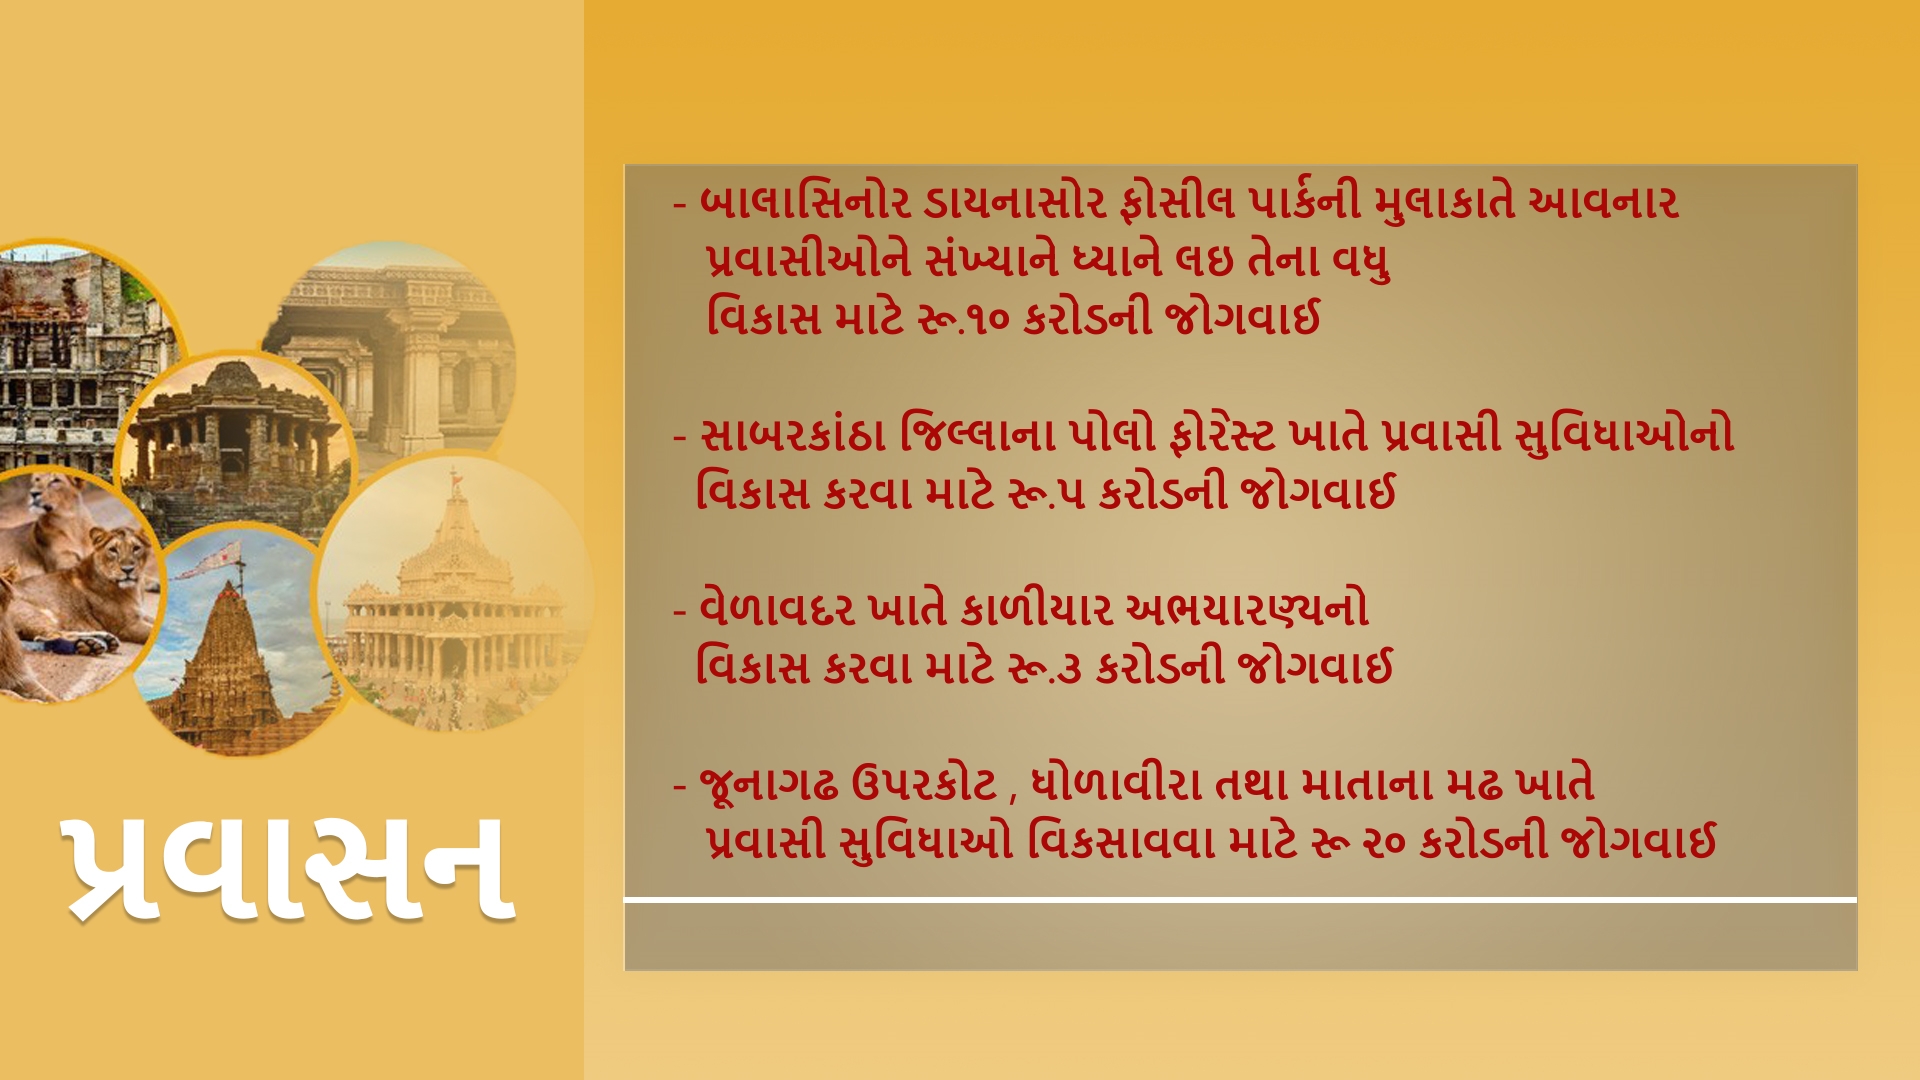 gujarat-budget-2020-21-know-what-is-the-provision-for-the-development-of-tourism-industry